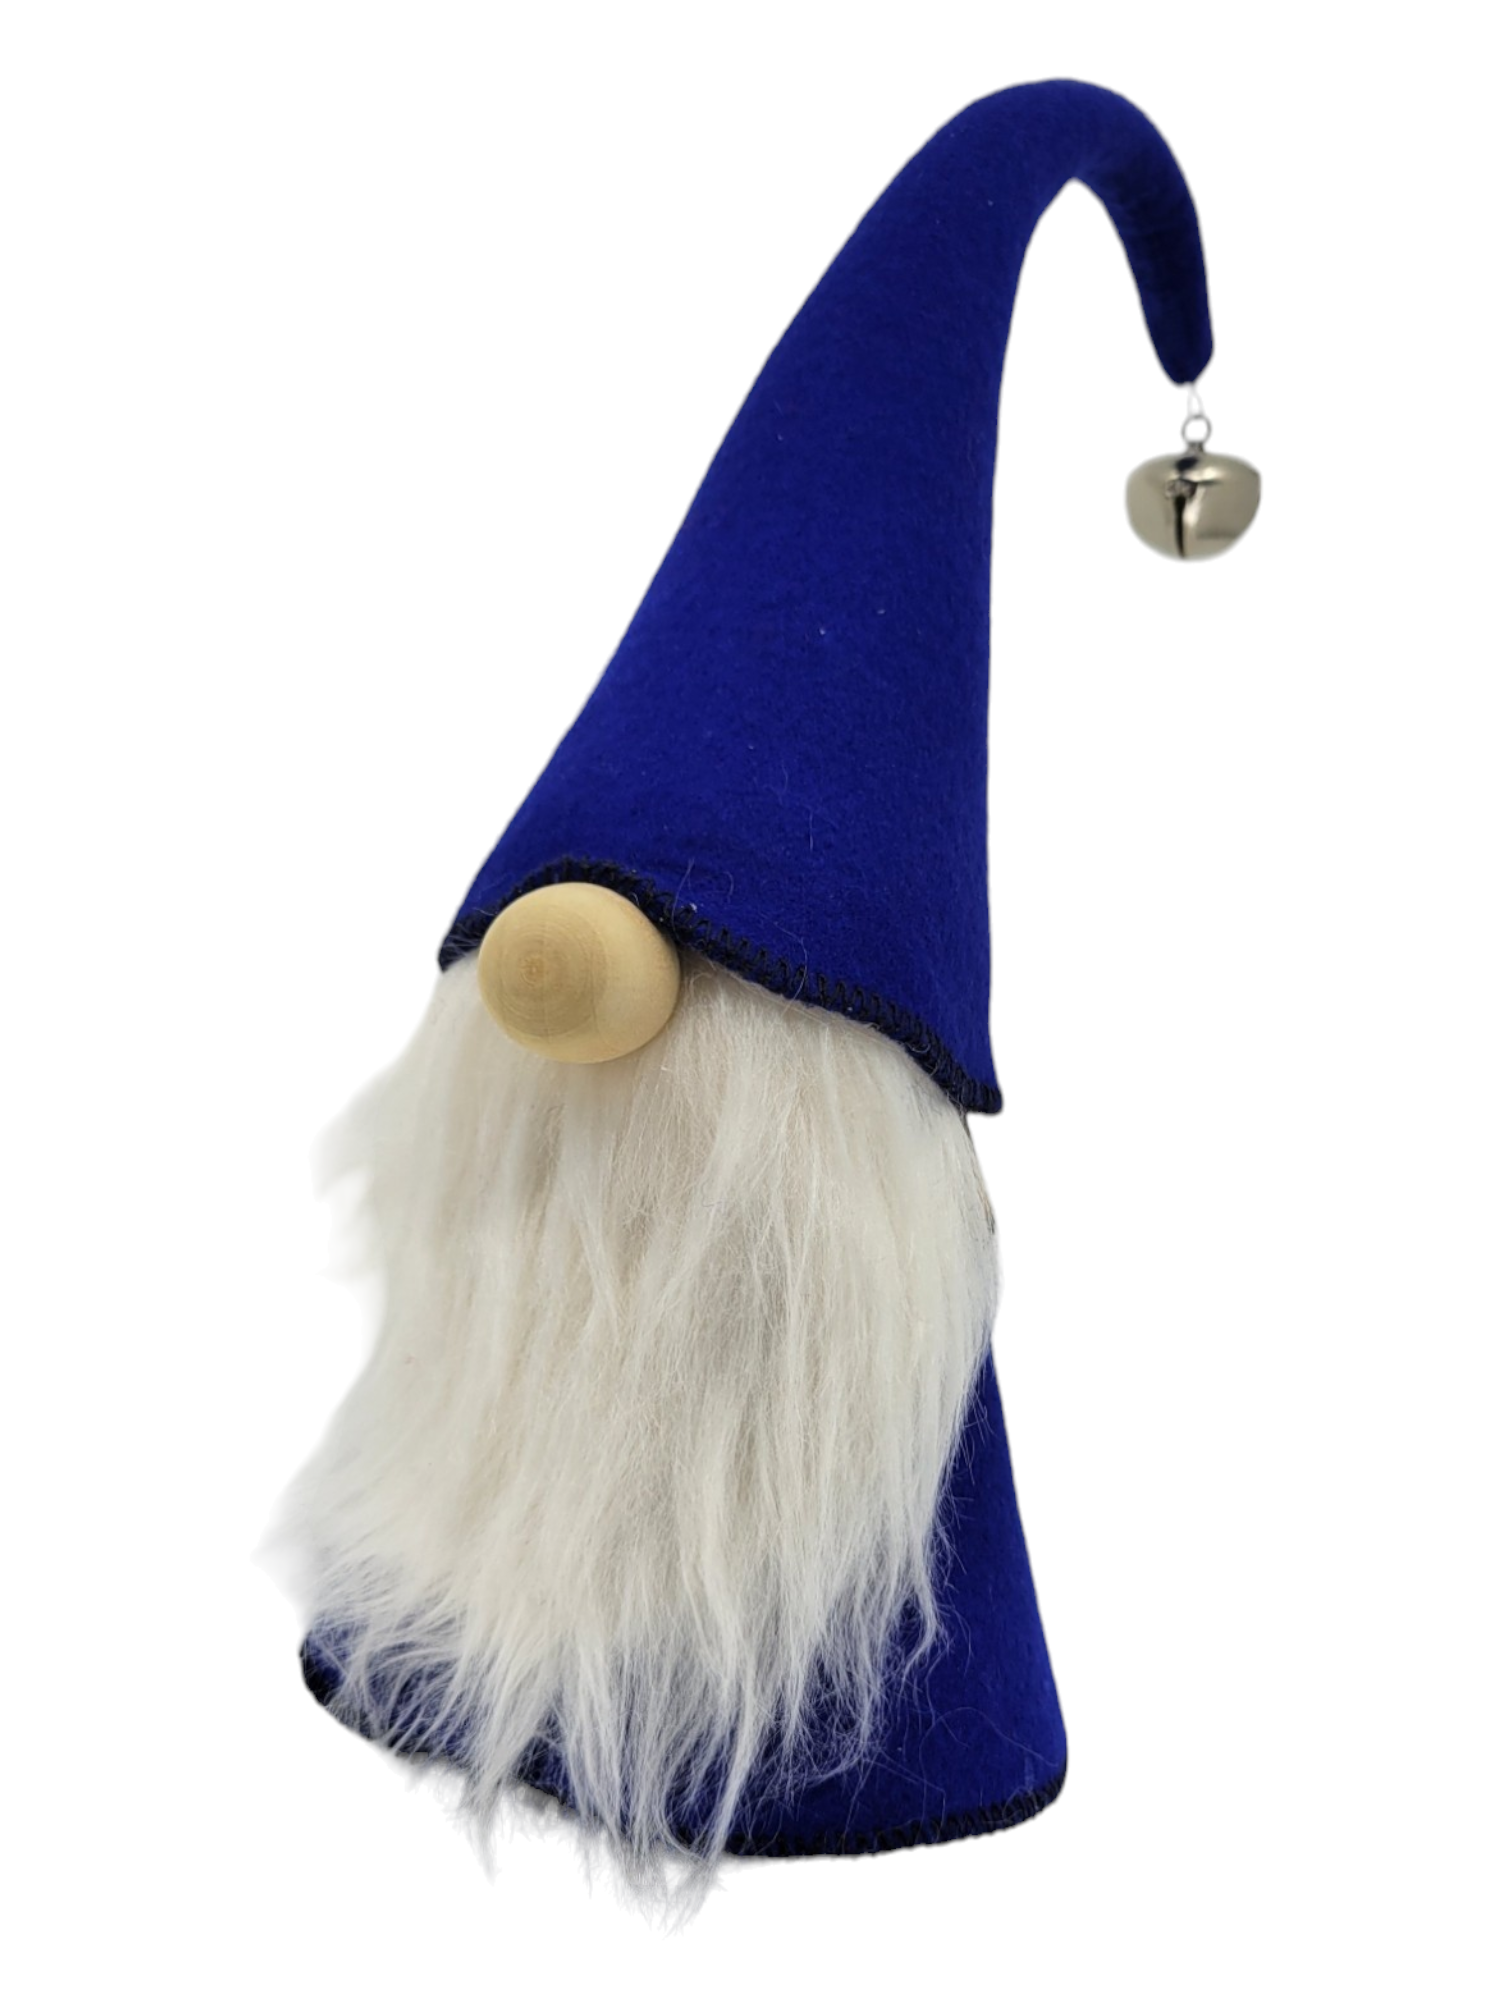 Tomte: Blue Gnome (12" Inches)